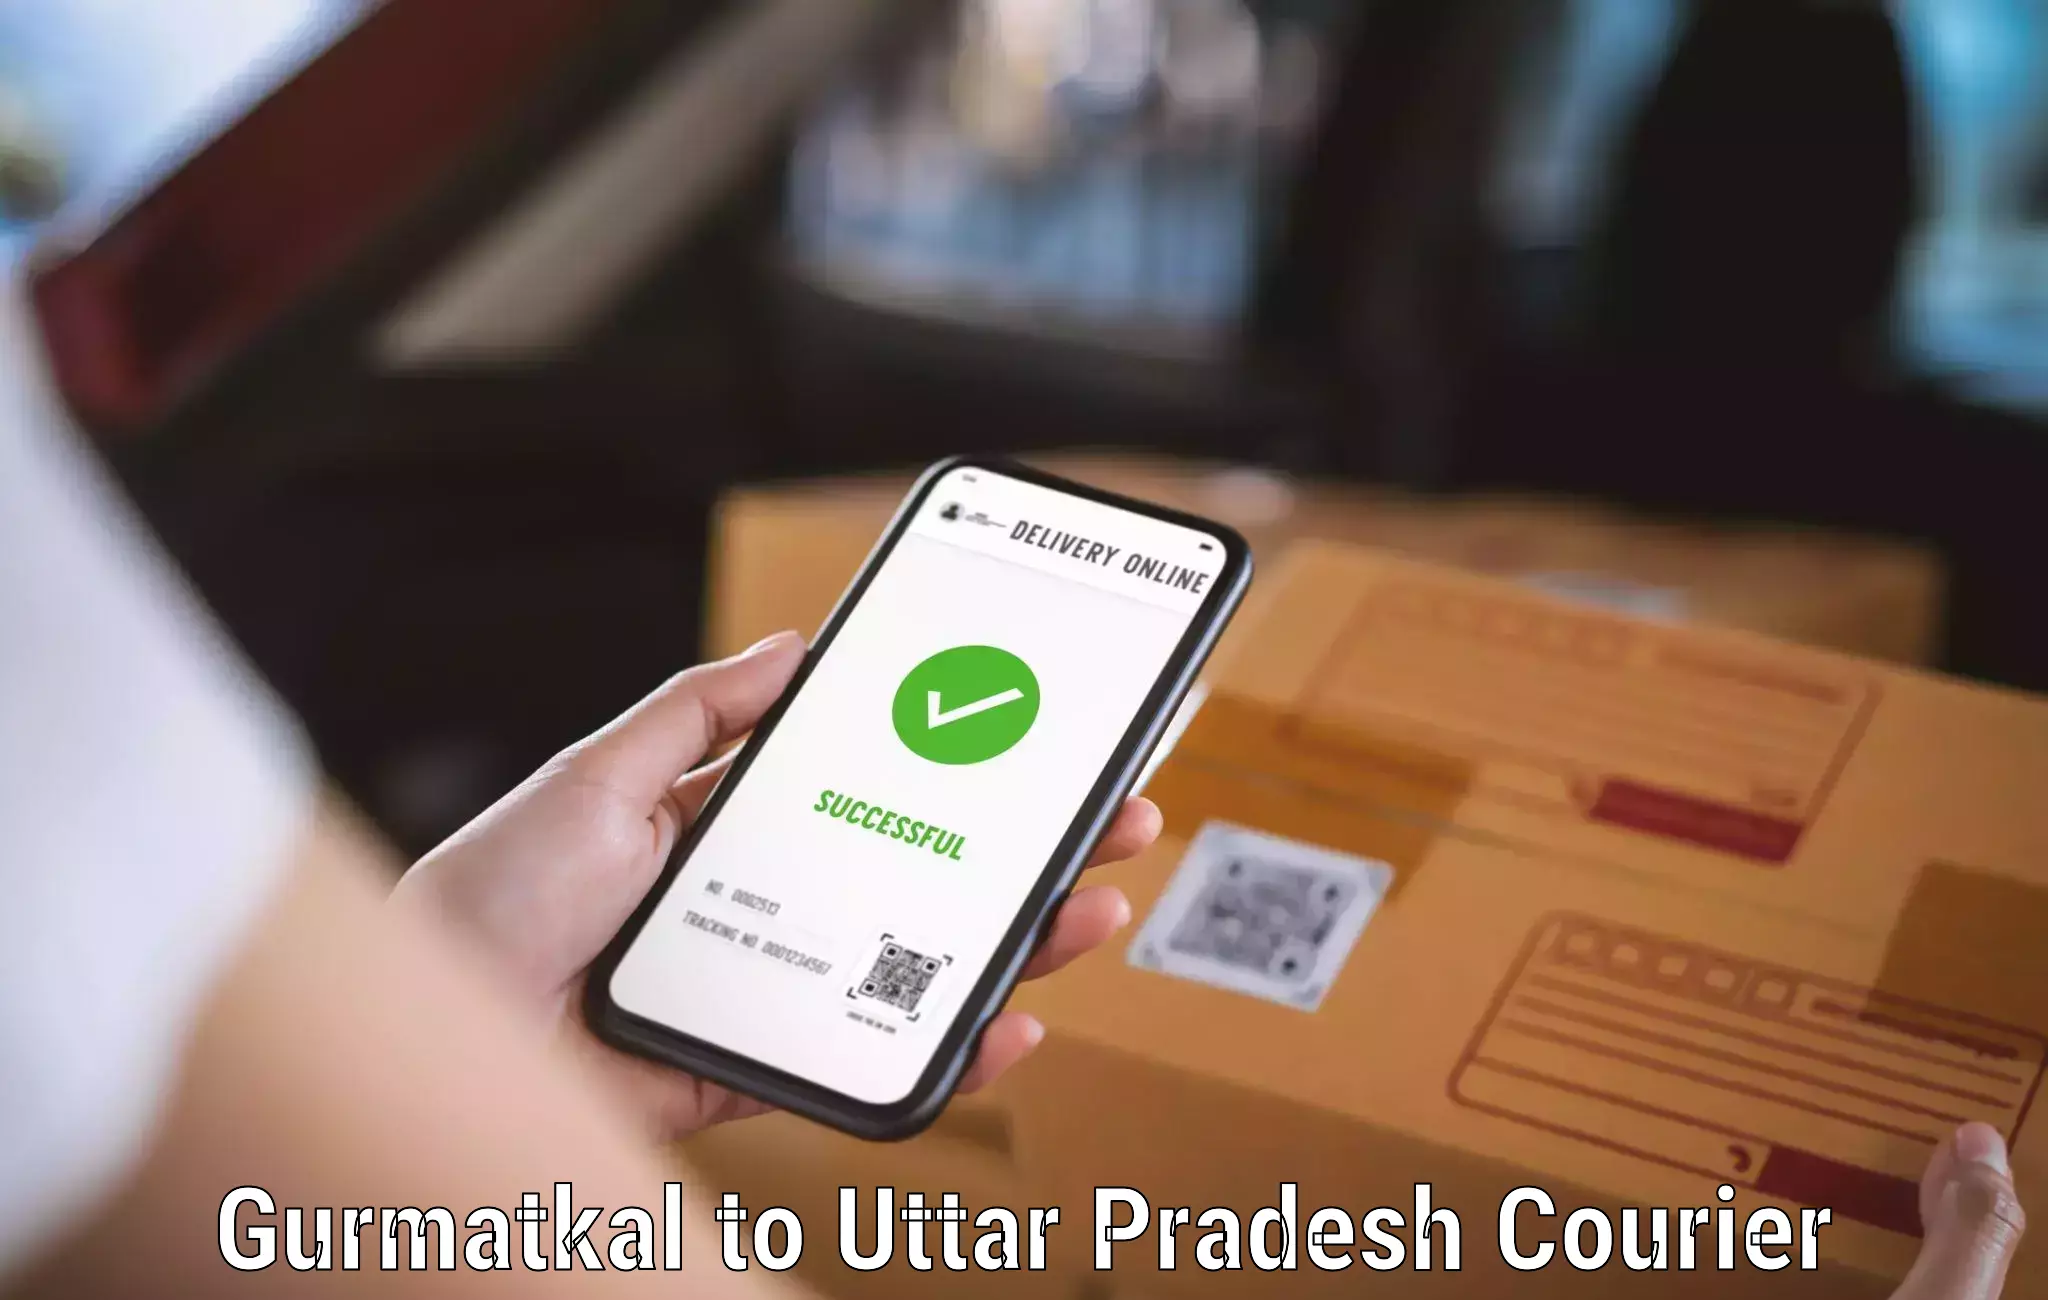 Courier service efficiency Gurmatkal to Sikandrabad